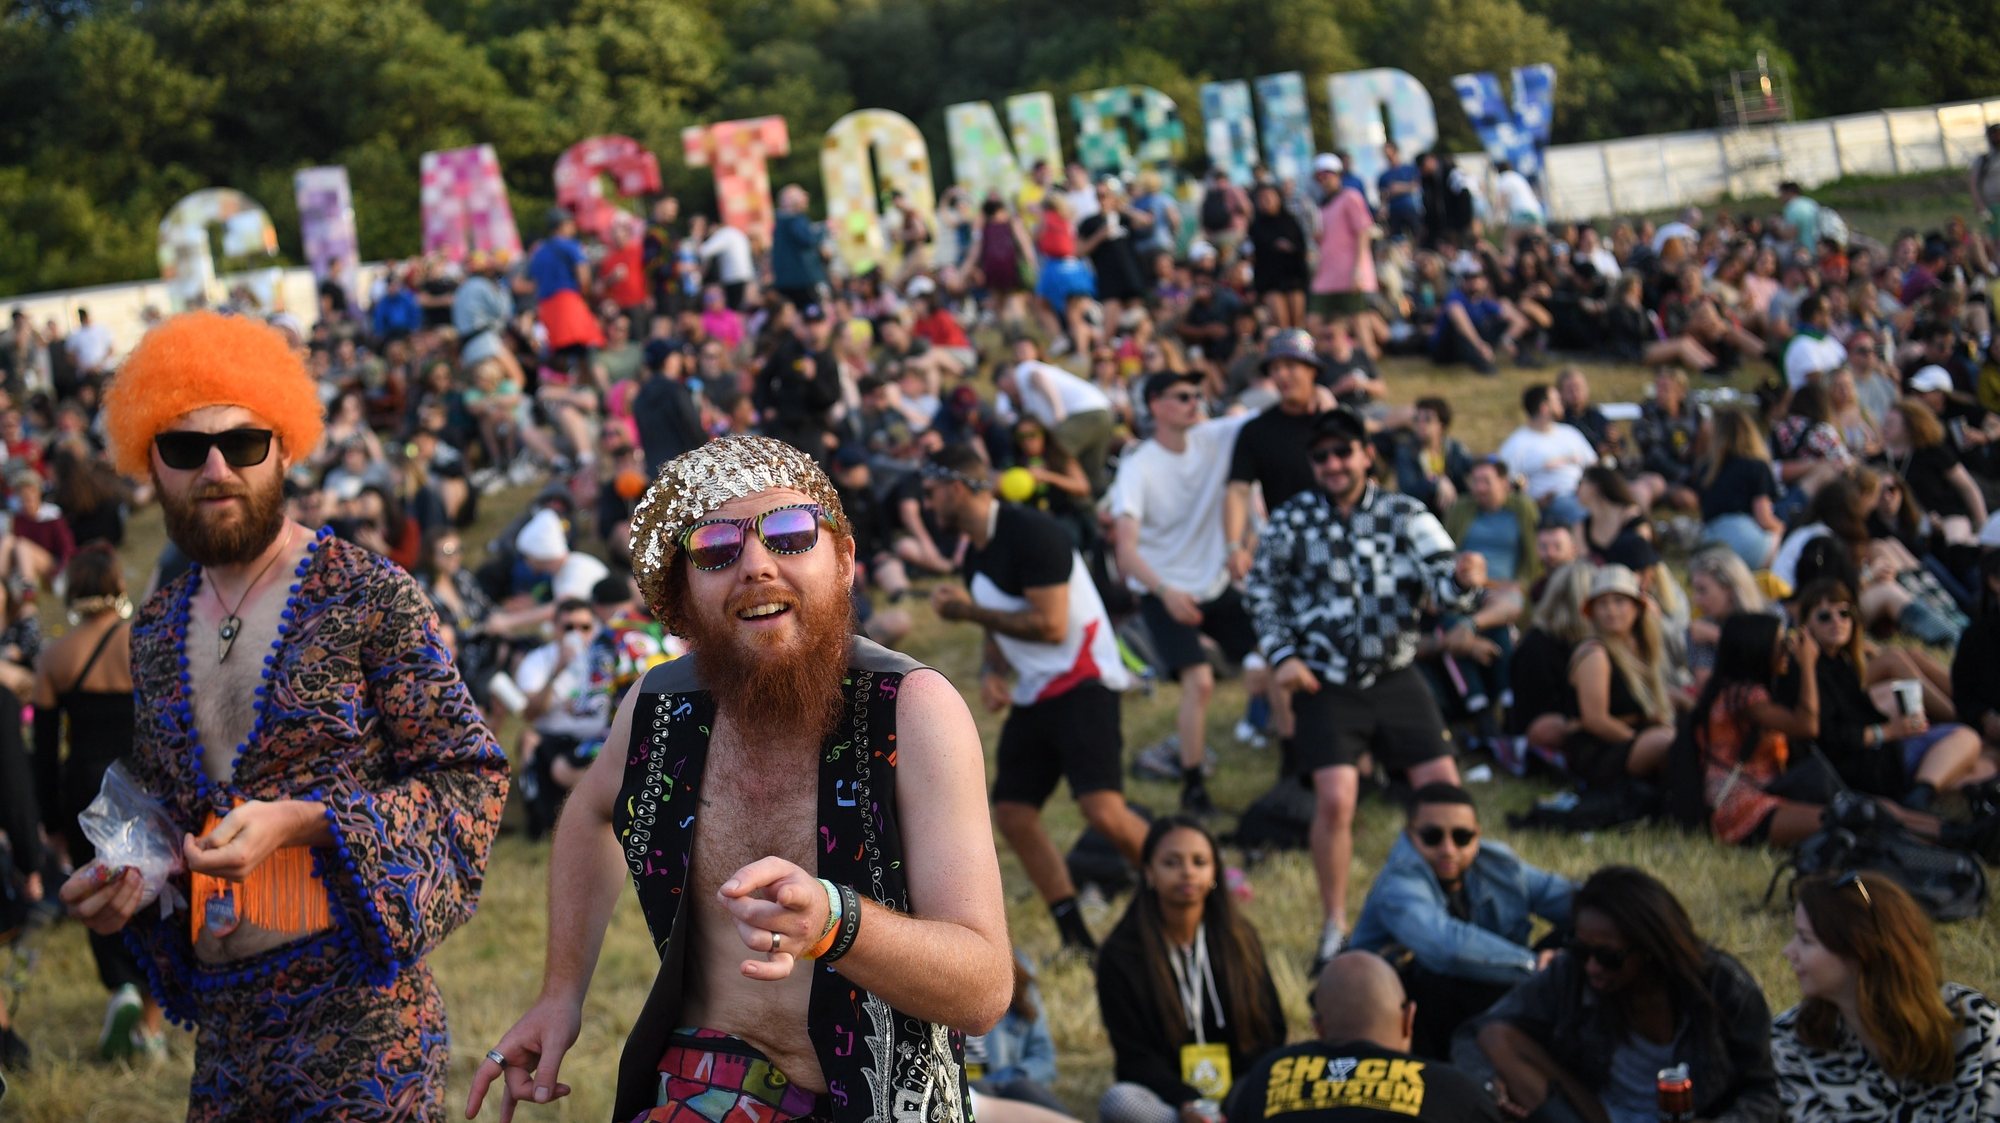 epa08303237 (FILE) - Festival goers dance on the first day of the Glastonbury Festival at Worthy Farm in Somerset, Britain, 26 June 2019 (reissued 18 March 2020). According to media reports, the Glastonbury festival has been cancelled due to the coronavirus pandemic. It was due to celebrate its 50th anniversary.  EPA/NEIL HALL *** Local Caption *** 55300911